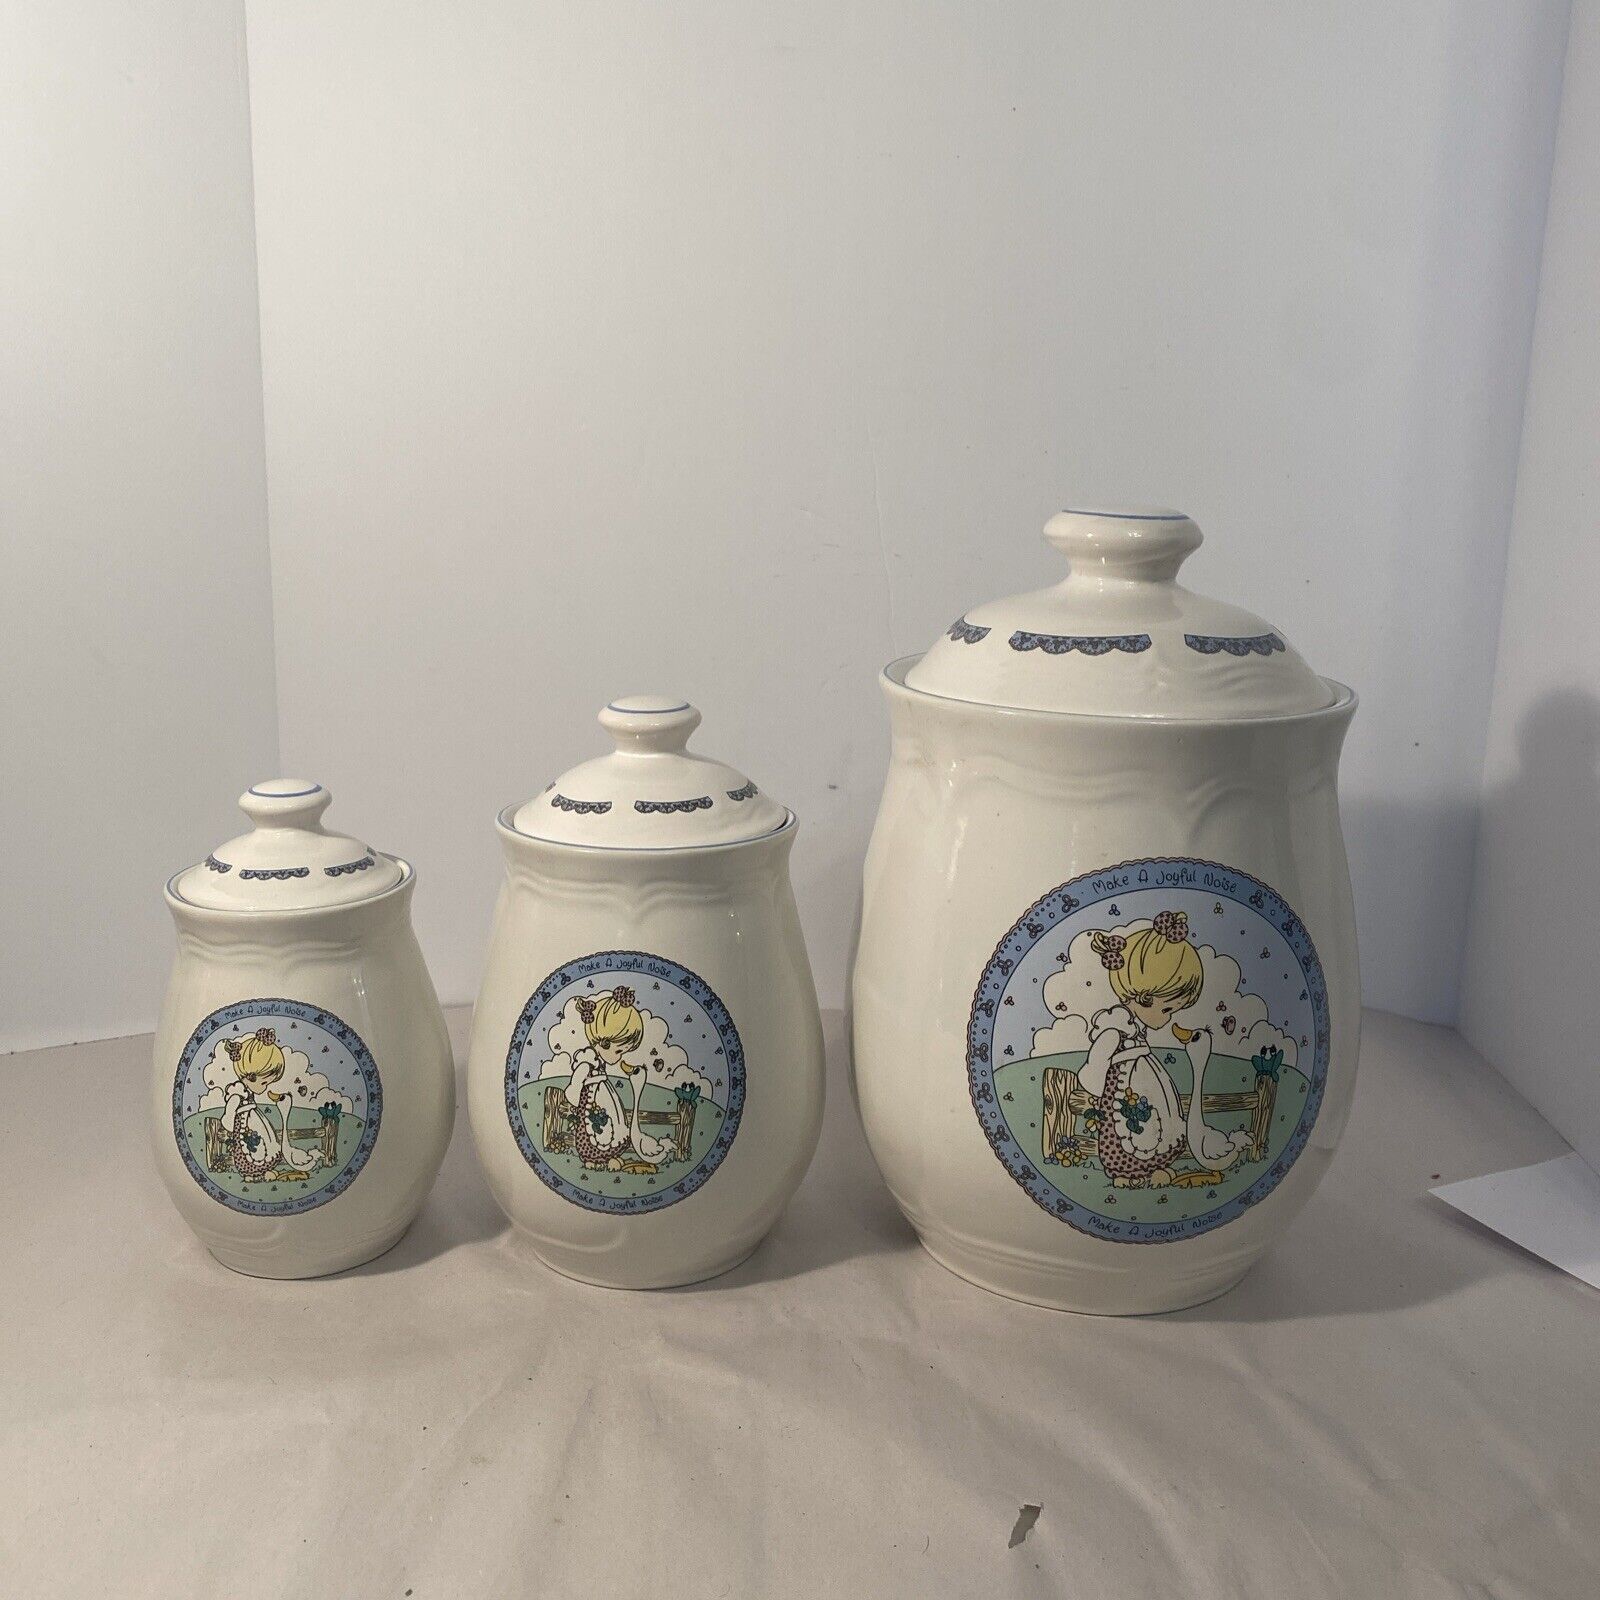 1992 Precious Moments “Make a Joyful Noise”  3 canister set - 6 Pieces Missing 1